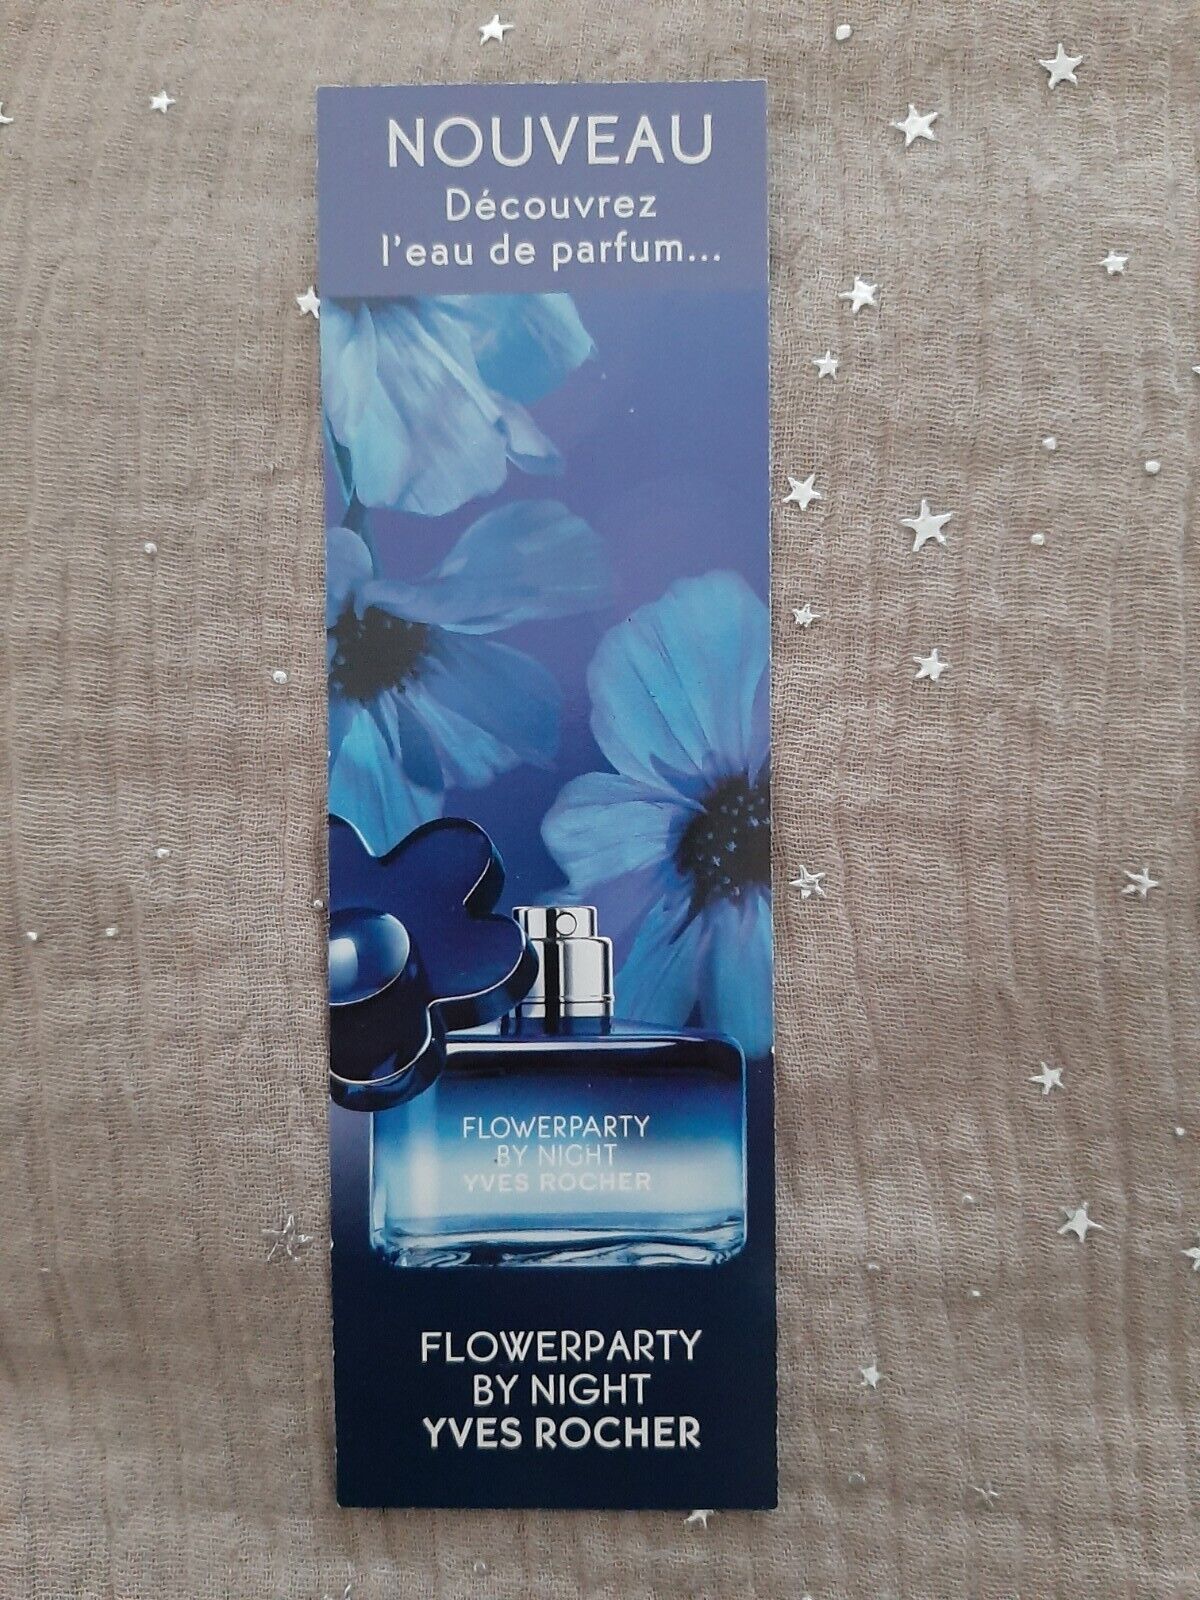 Perfume Card - Perfume Card. Yves Rocher - Flowerparty by Night